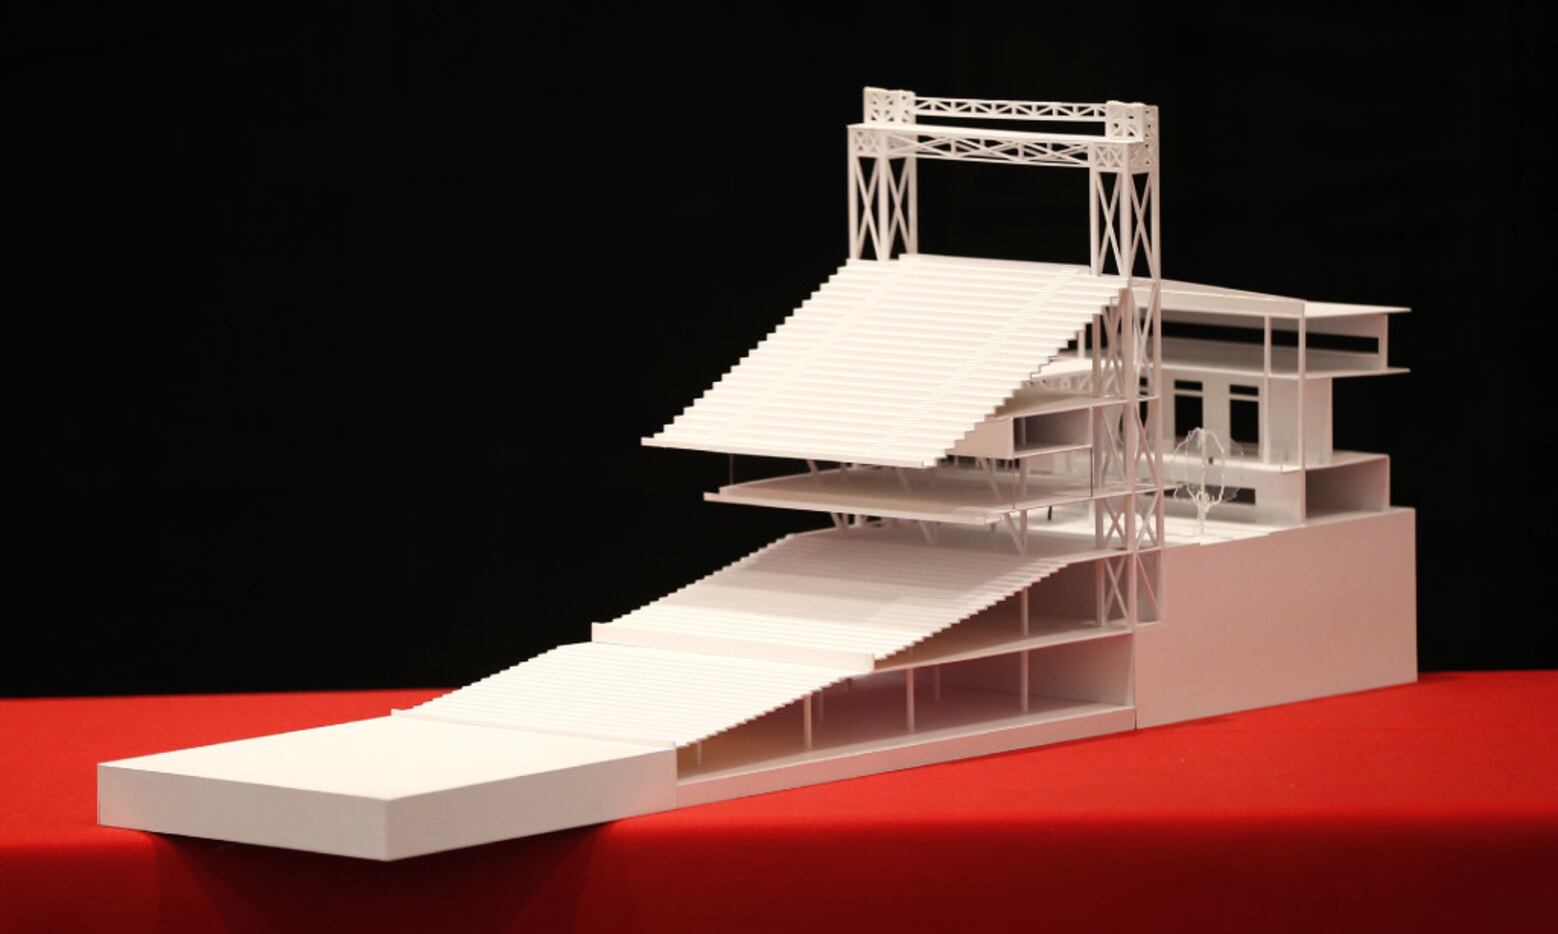 A model of the new Texas Rangers ballpark to be built by HKS.